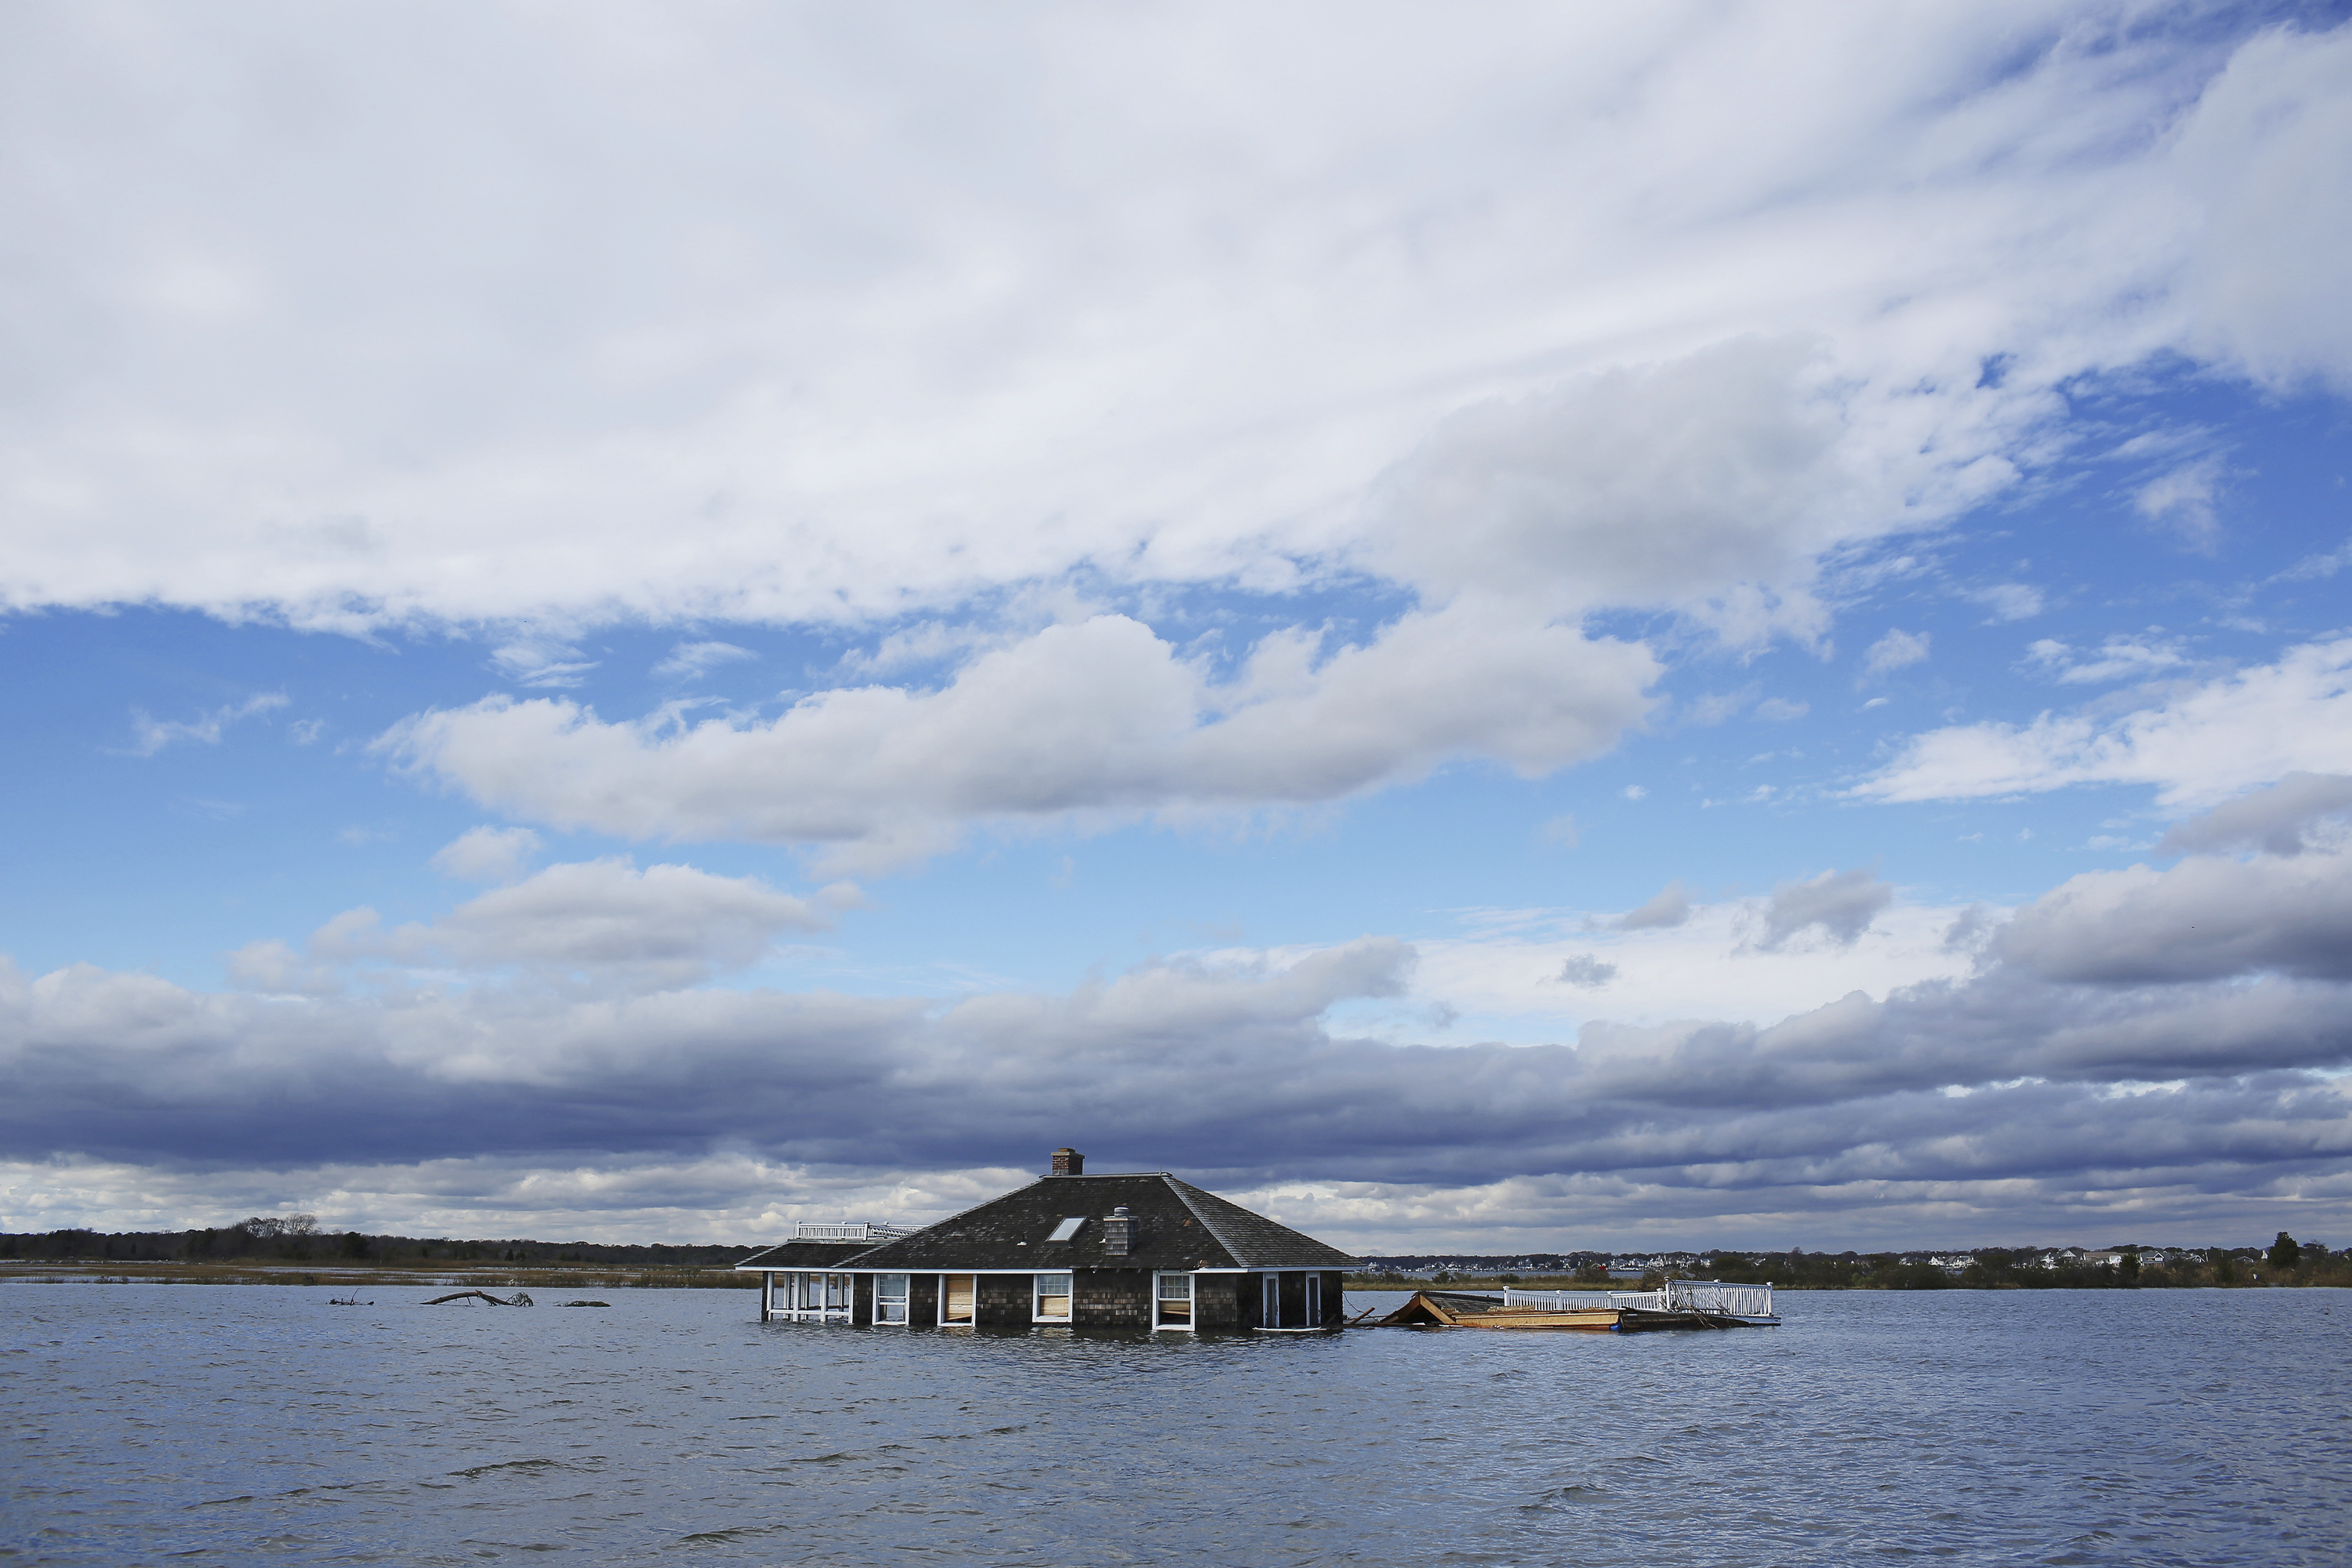 Deep trouble.A shore house near Mantoloking, N.J., sits in a lagoon after Superstorm Sandy in October 2012. (Andrew Quilty— Oculi/Redux)